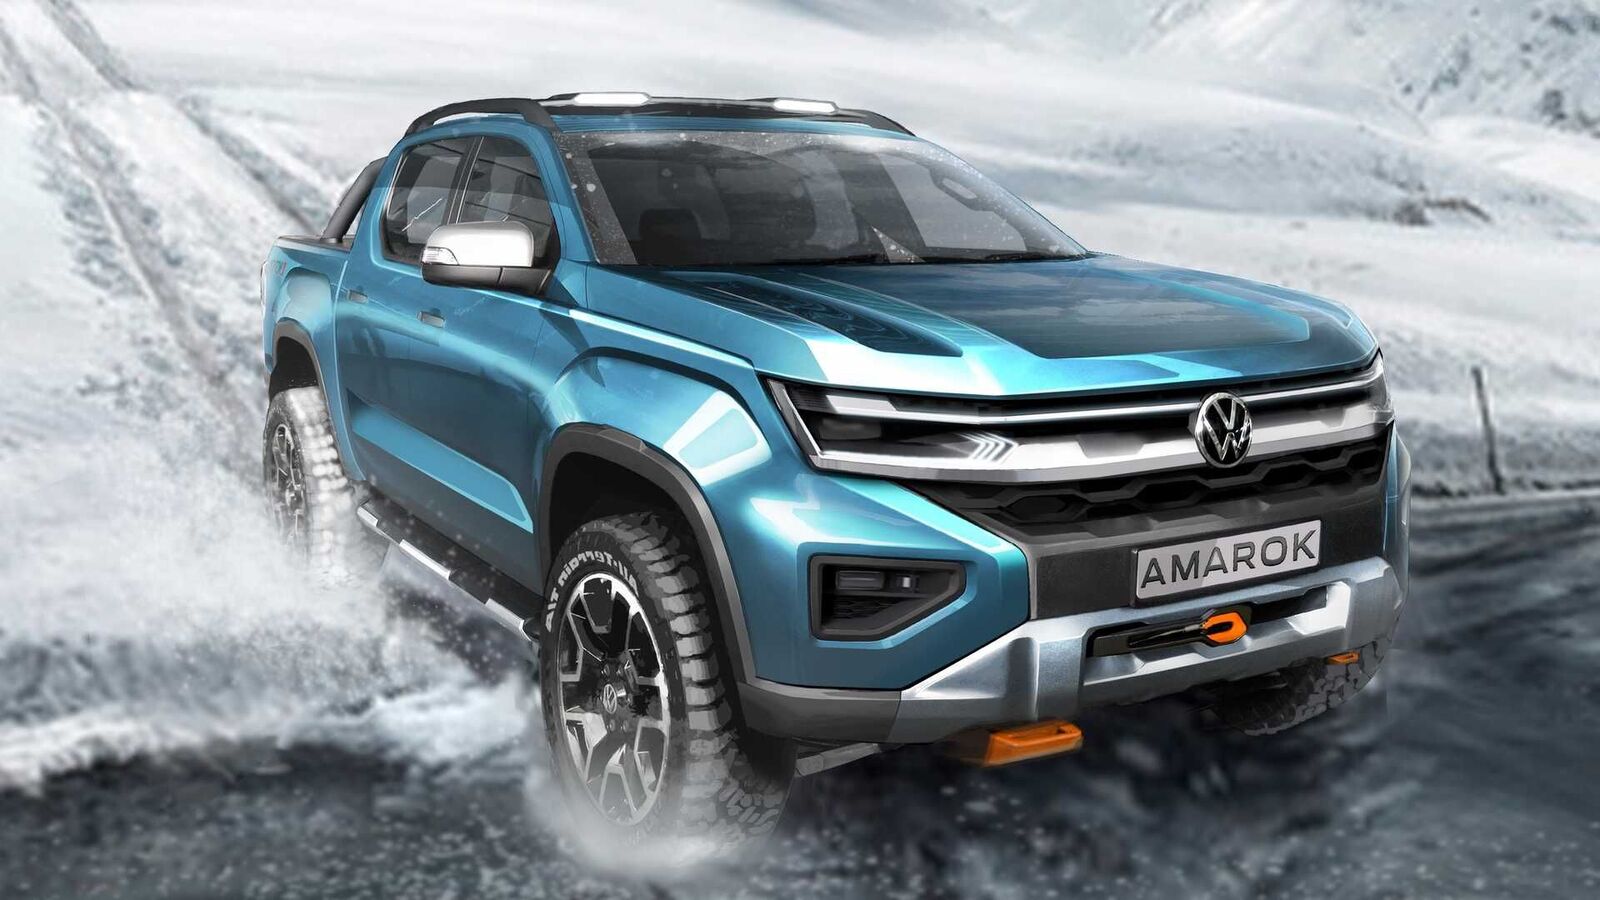 2023 Volkswagen Amarok is ready to hit the dust in revised avatar, teased again